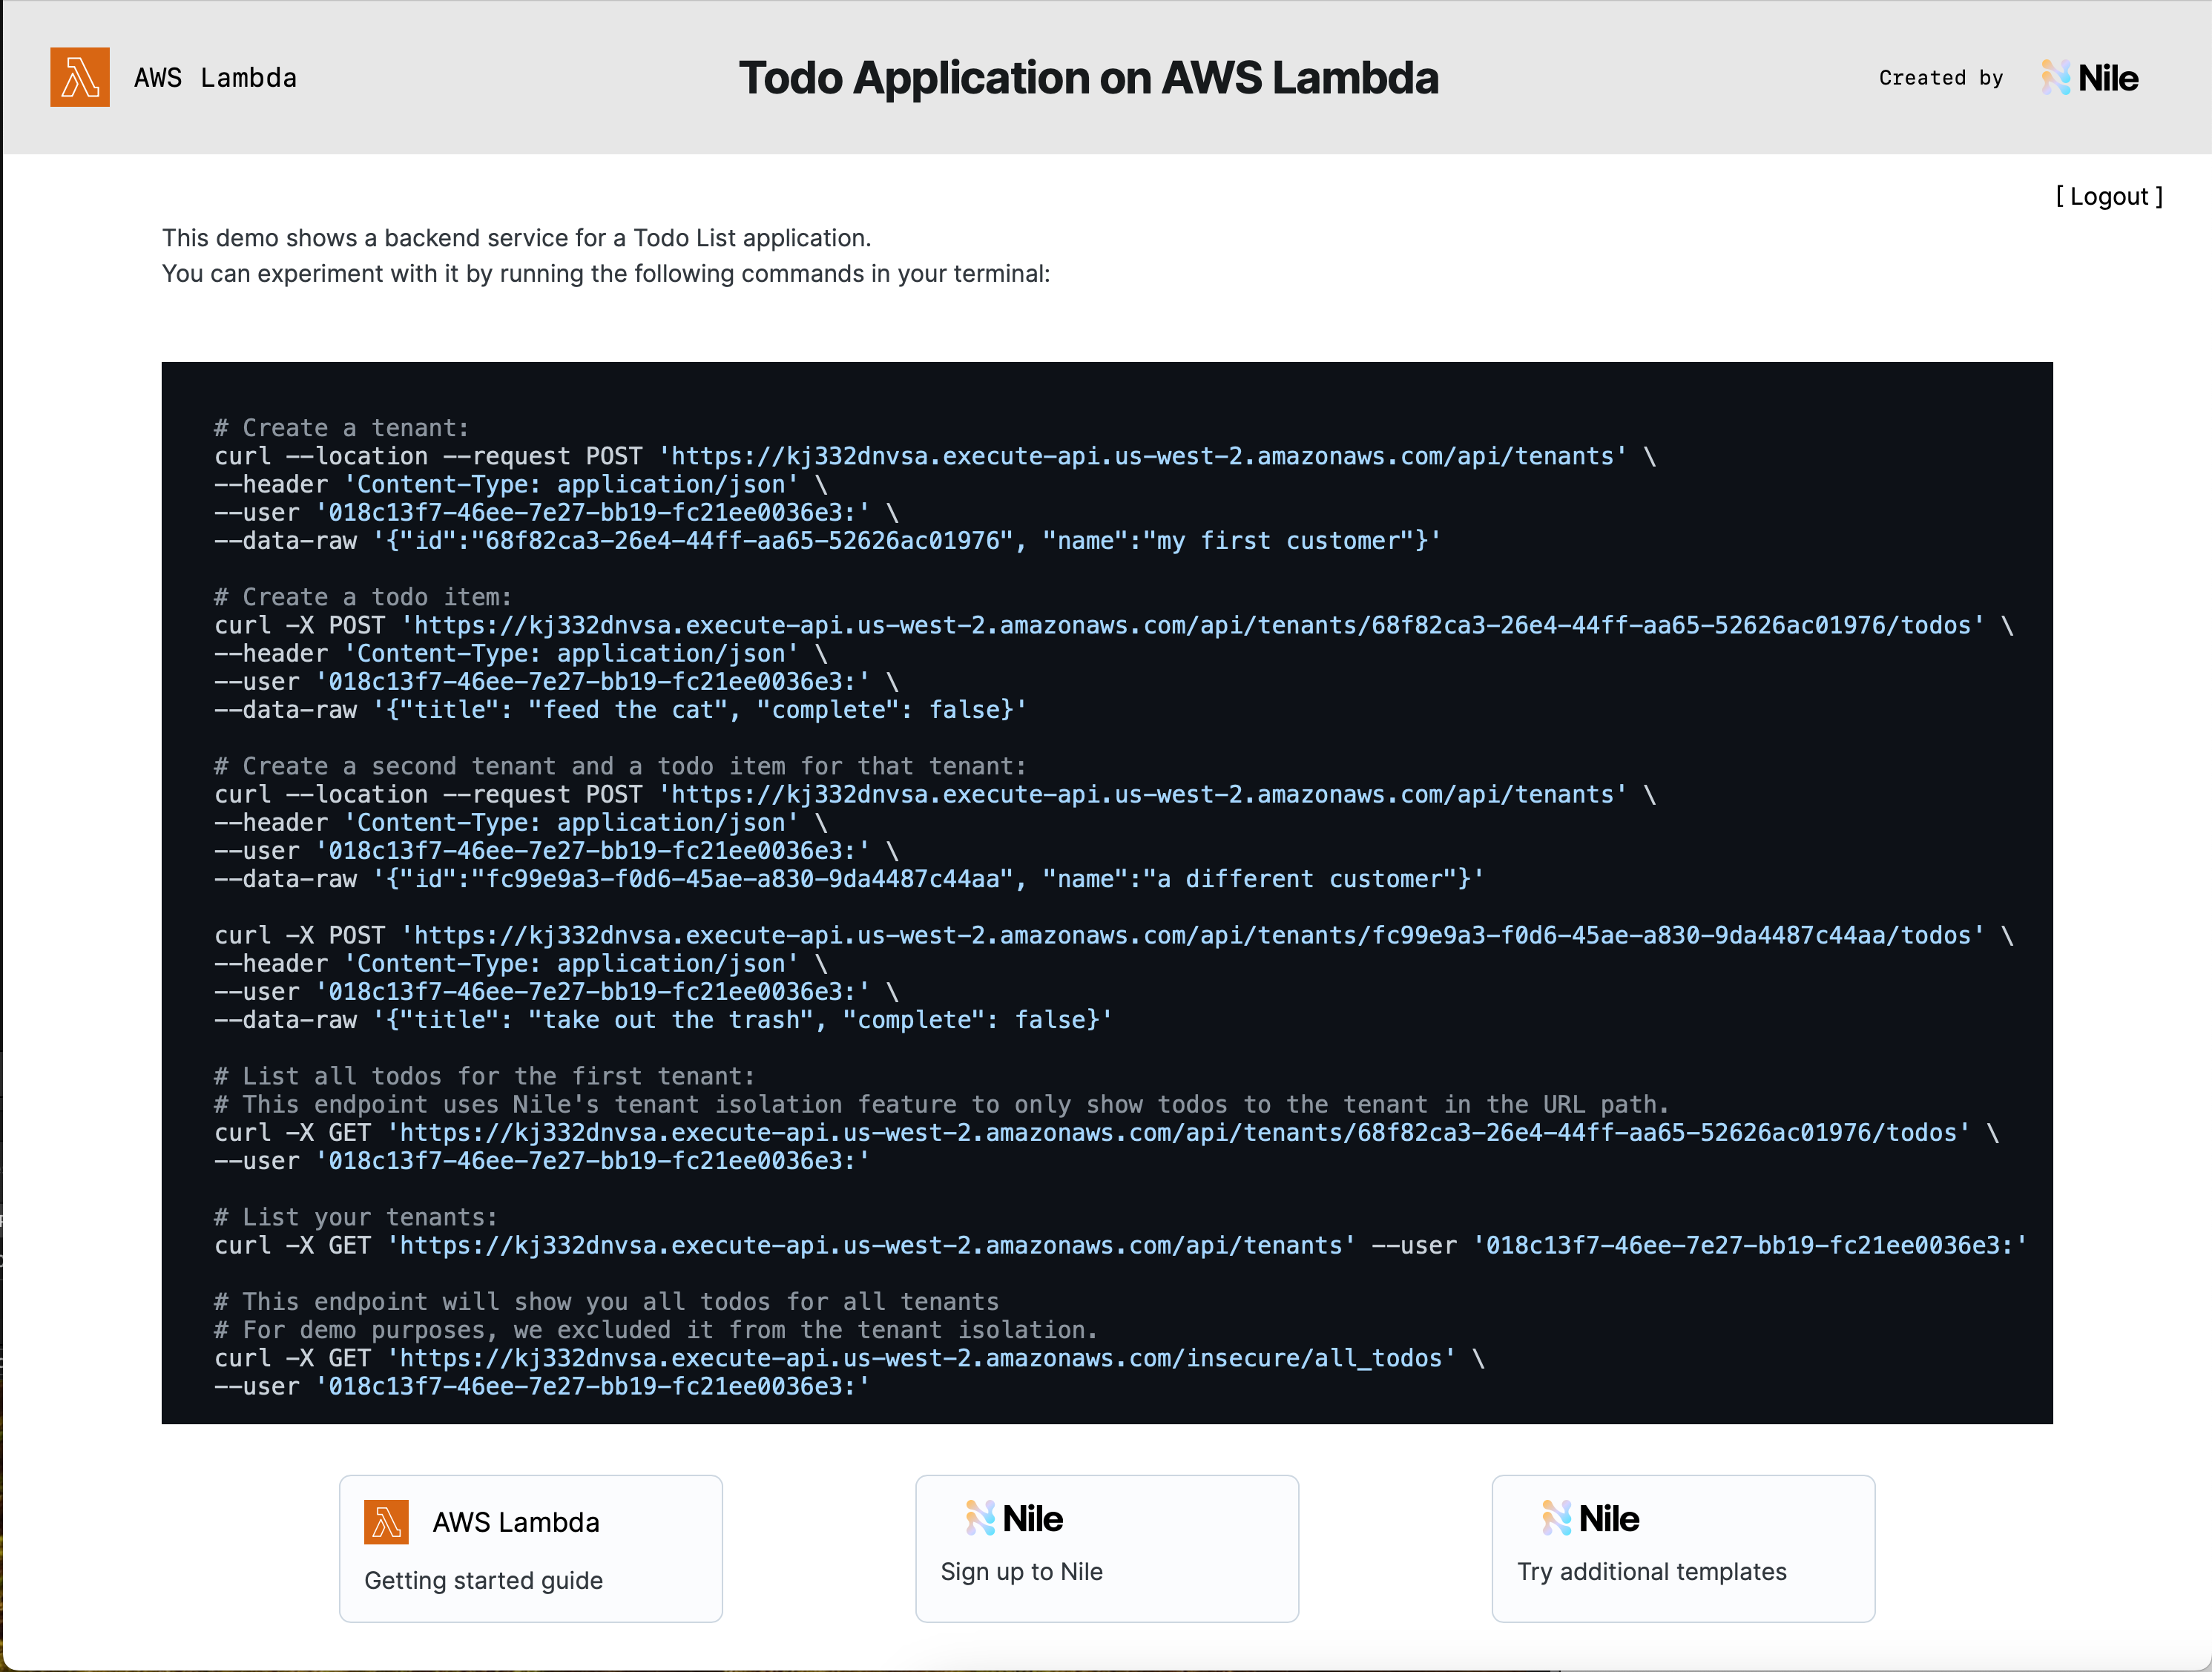 screen shot for Todo List application backend with Nile and AWS Lambda template